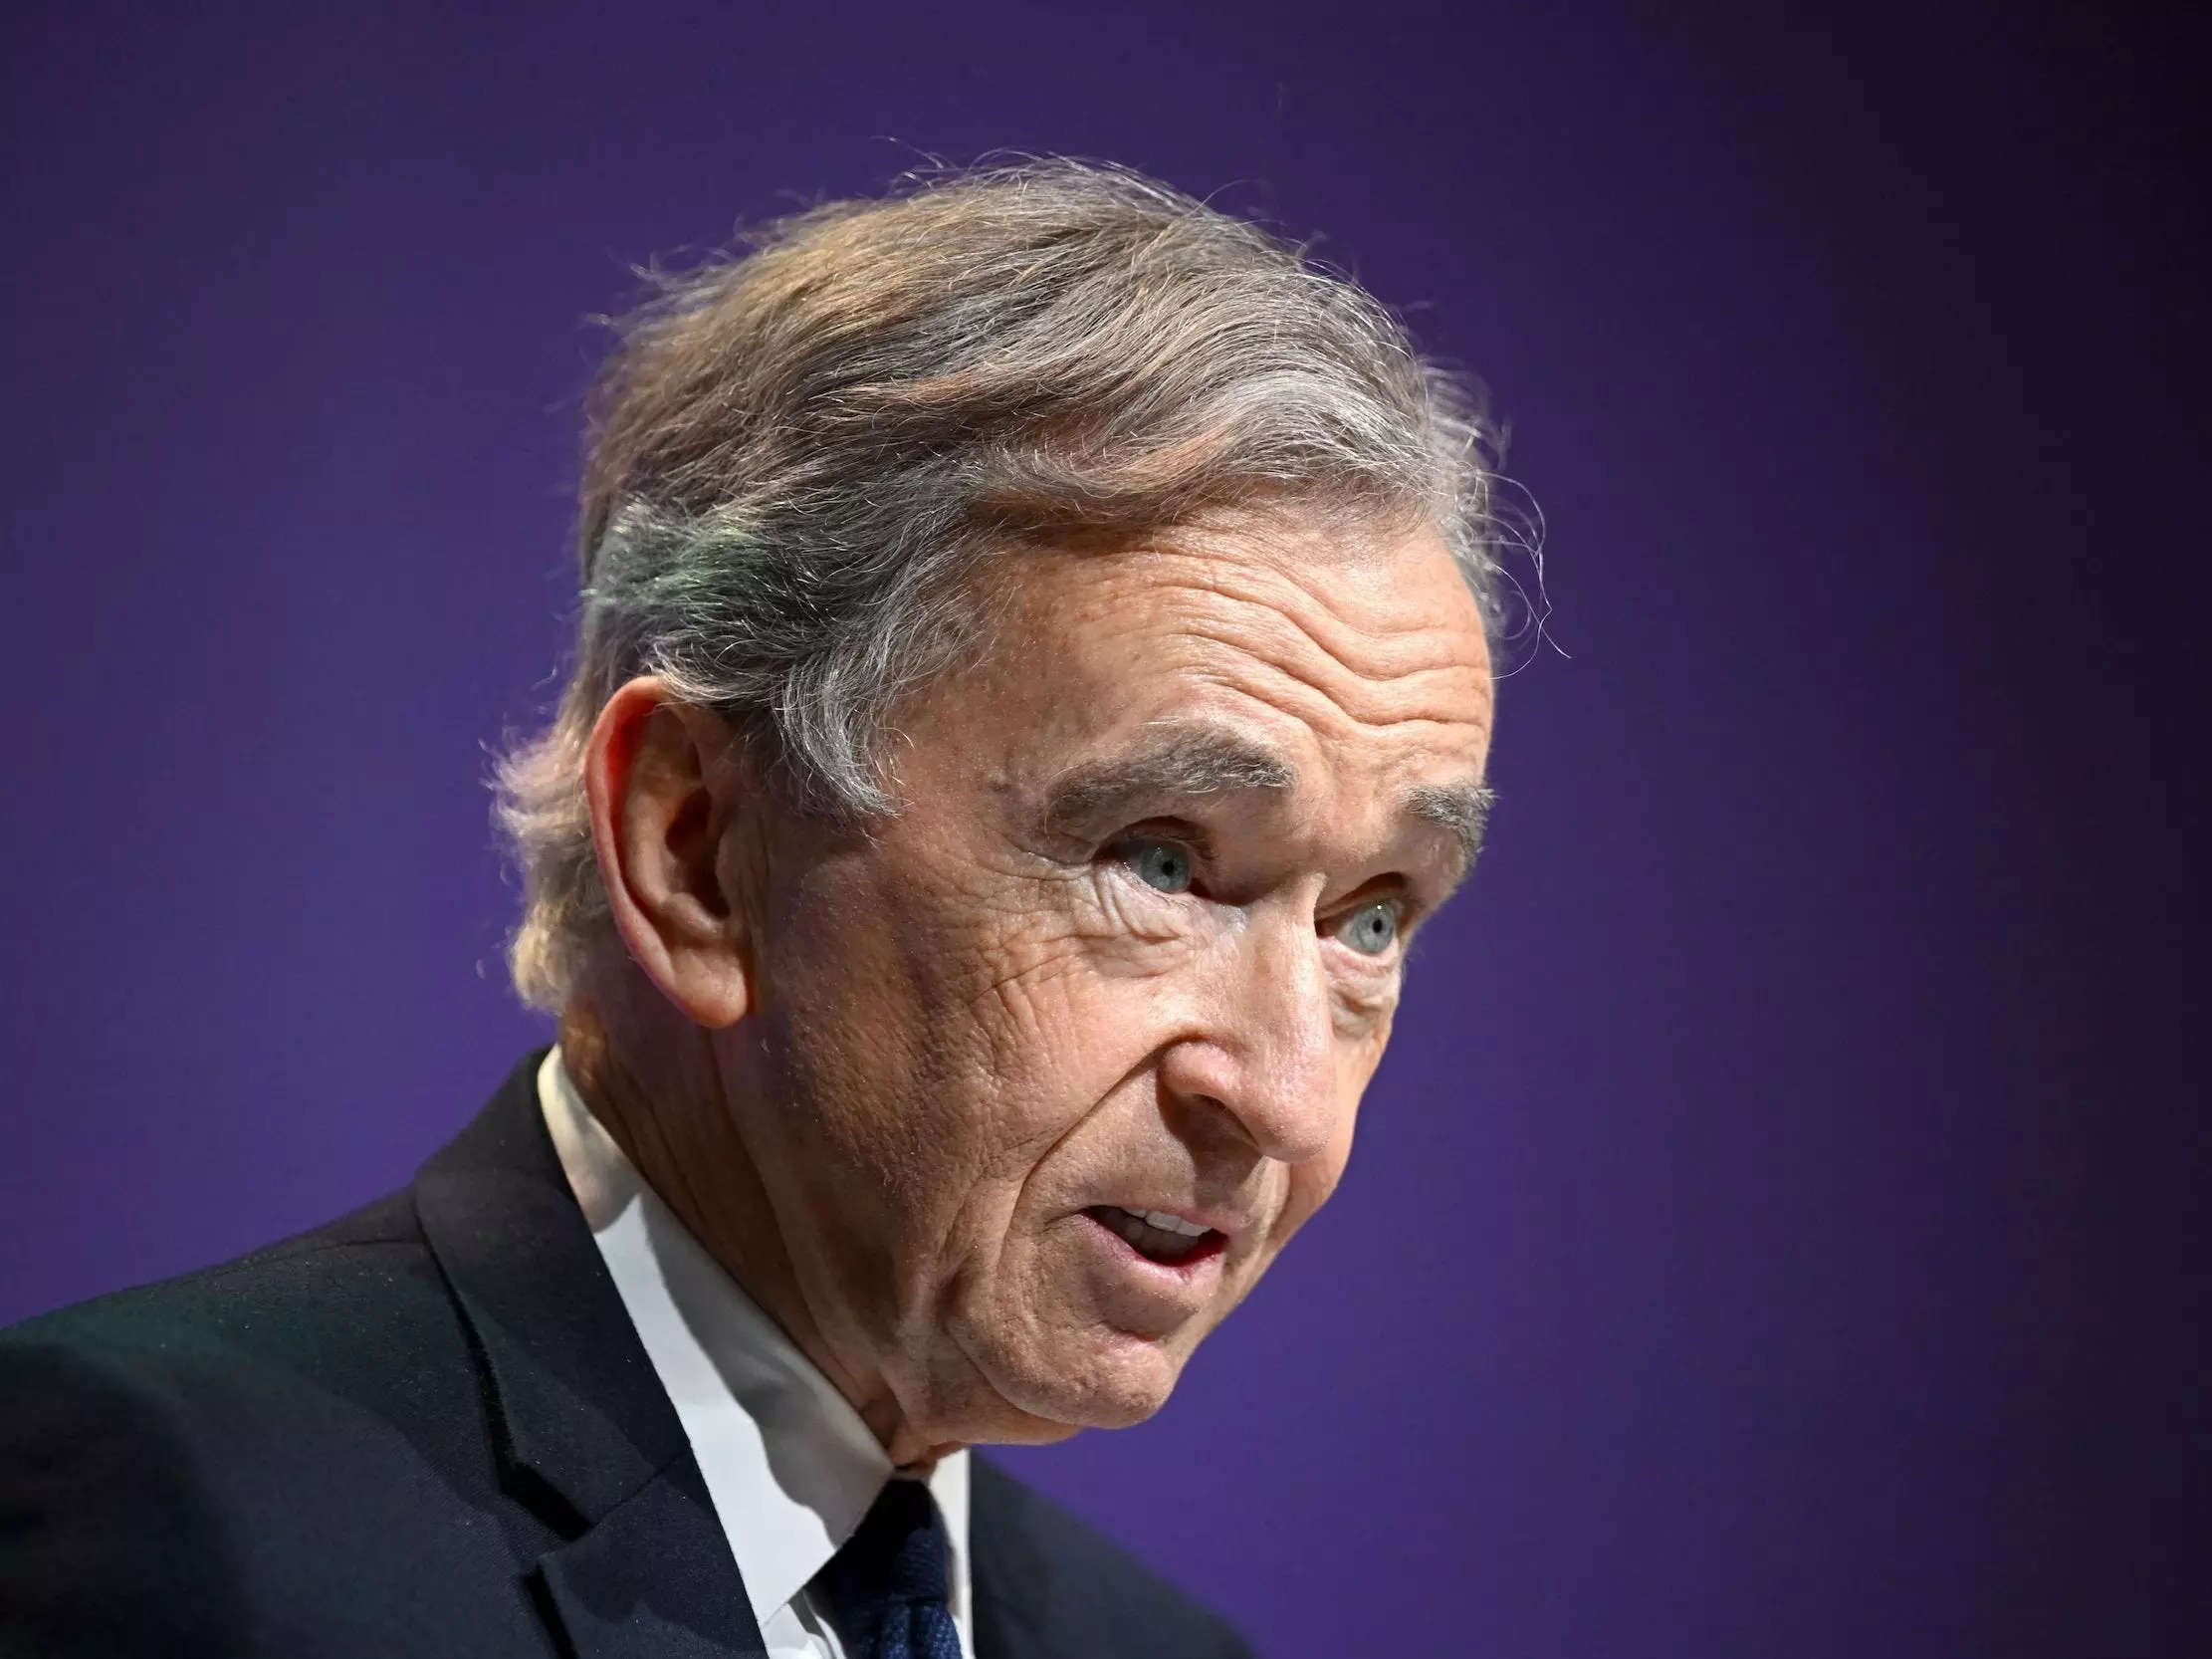 Bernard Arnault, the world's richest person, was nicknamed the 'wolf in  cashmere' by rivals because of his predatory takeover moves. His company  just hit a $500 billion valuation.